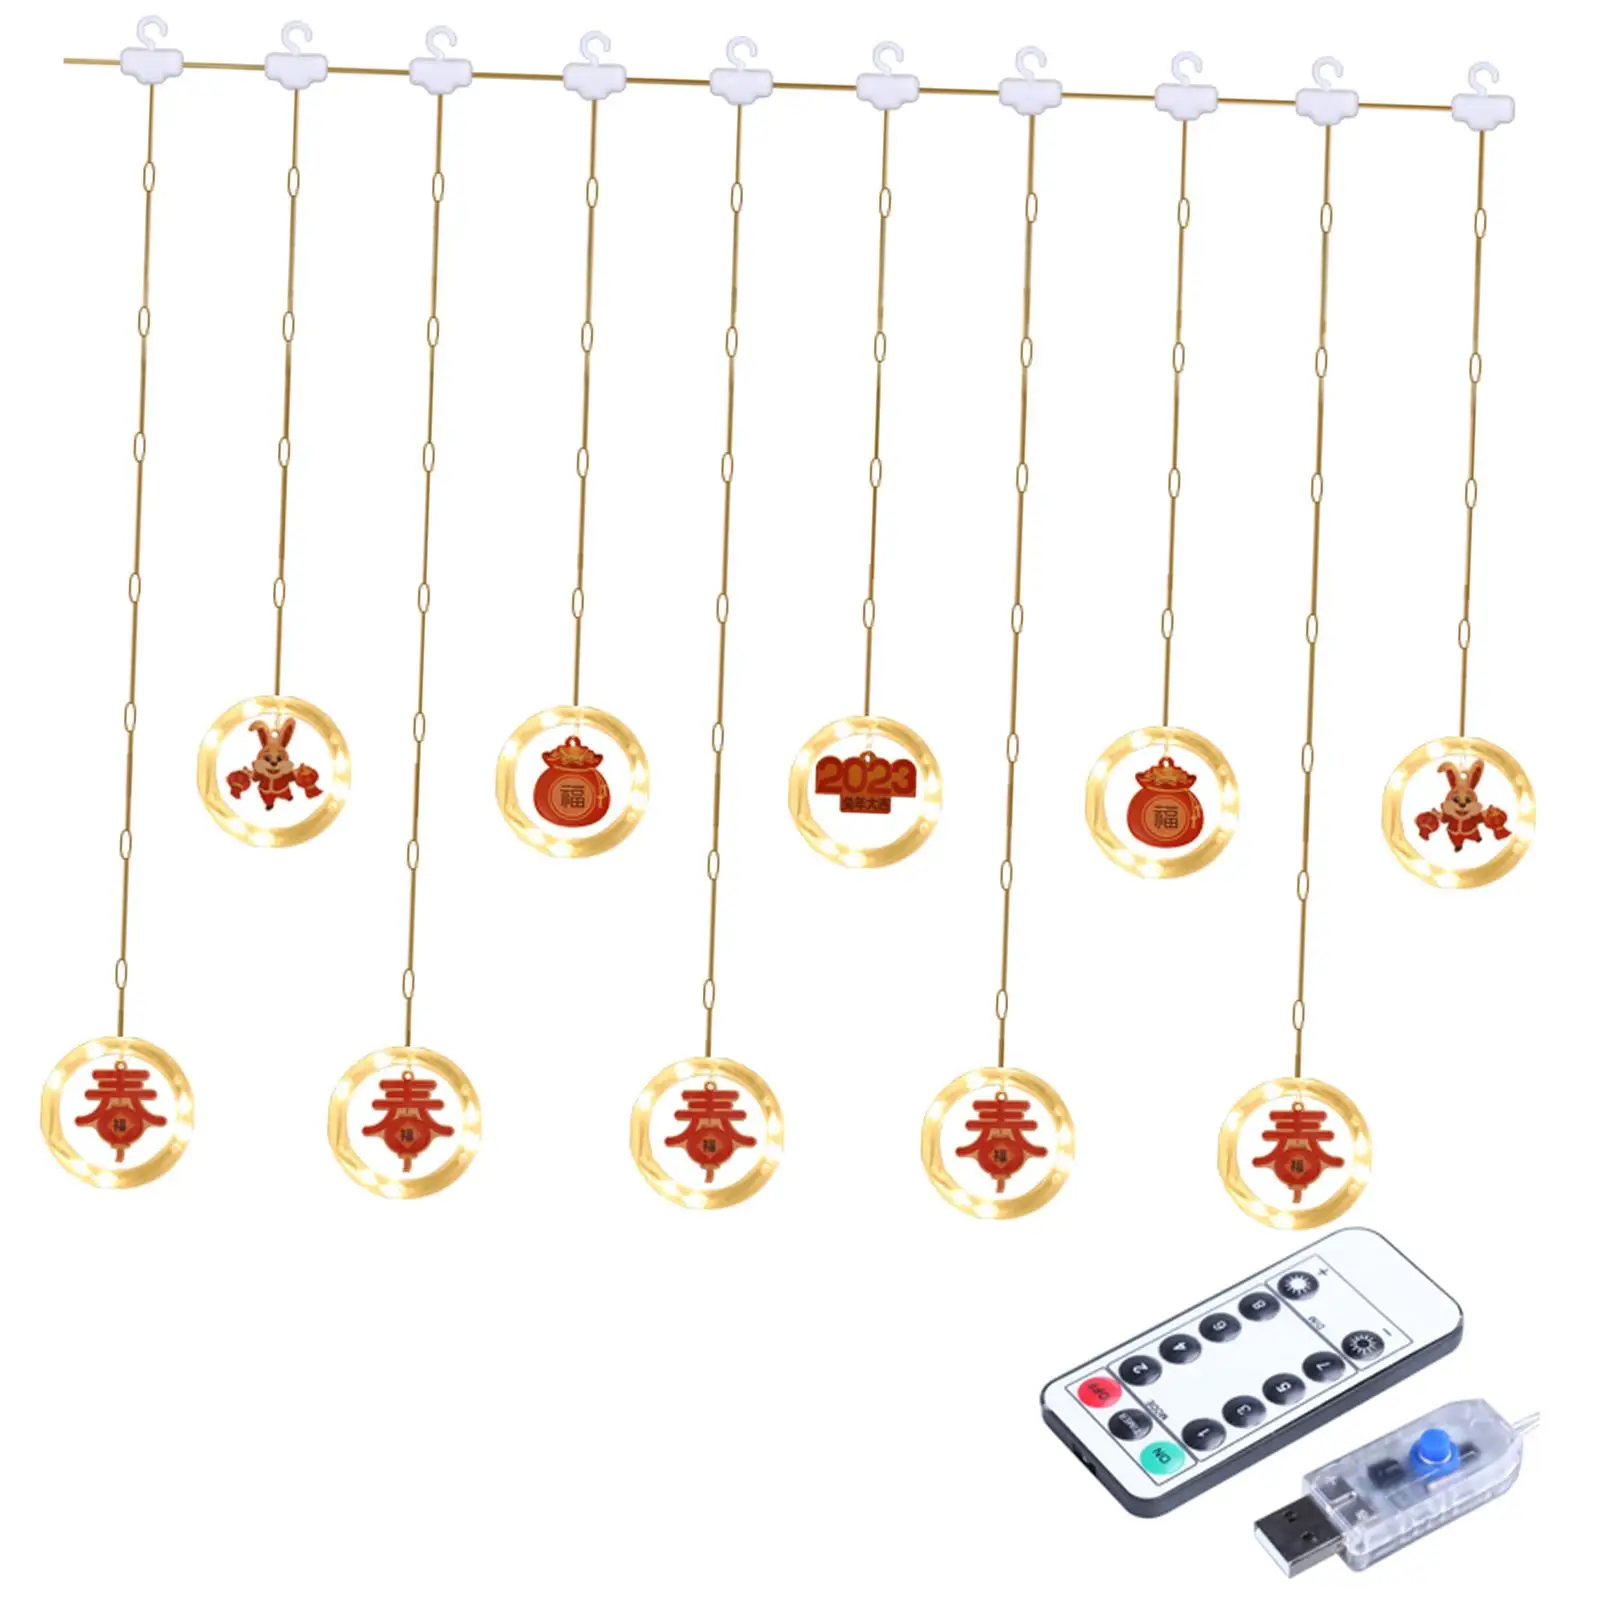 LED Chinese Spring Festival String Light Warm White Lighting Remote Control Lamp Ornament for Yard Bar Bedroom Decoration